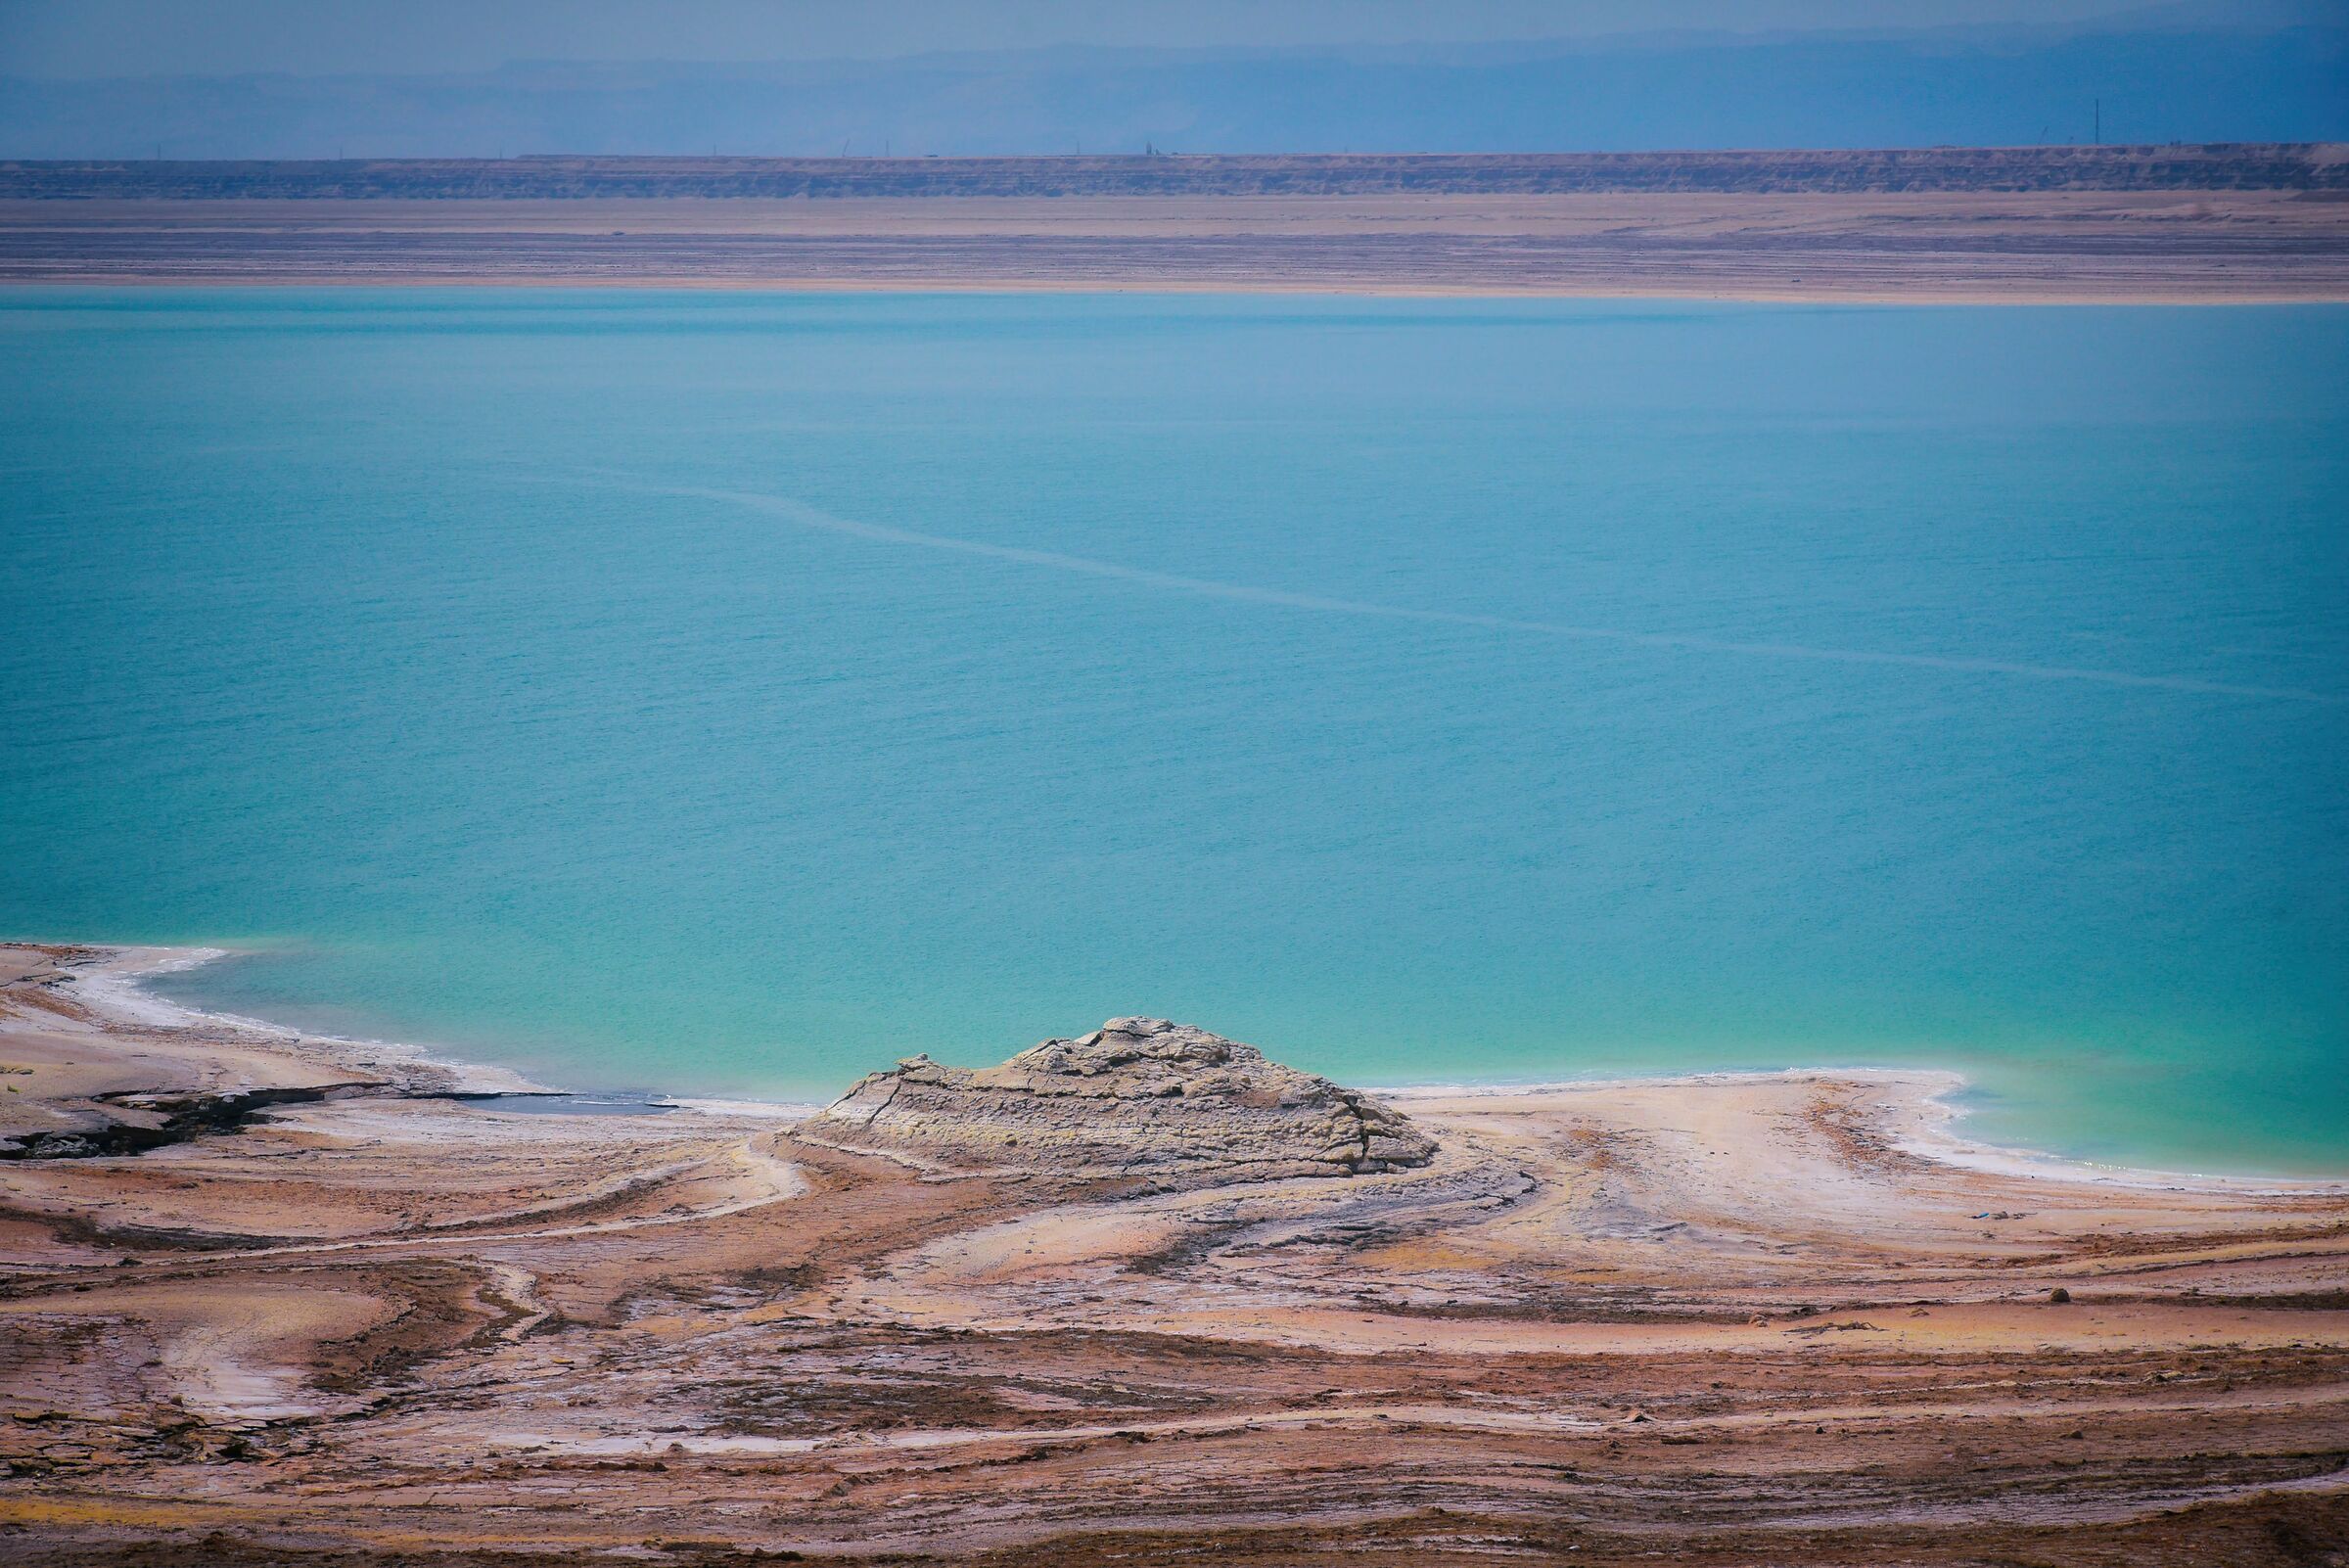 The contrasts of the Dead Sea ...